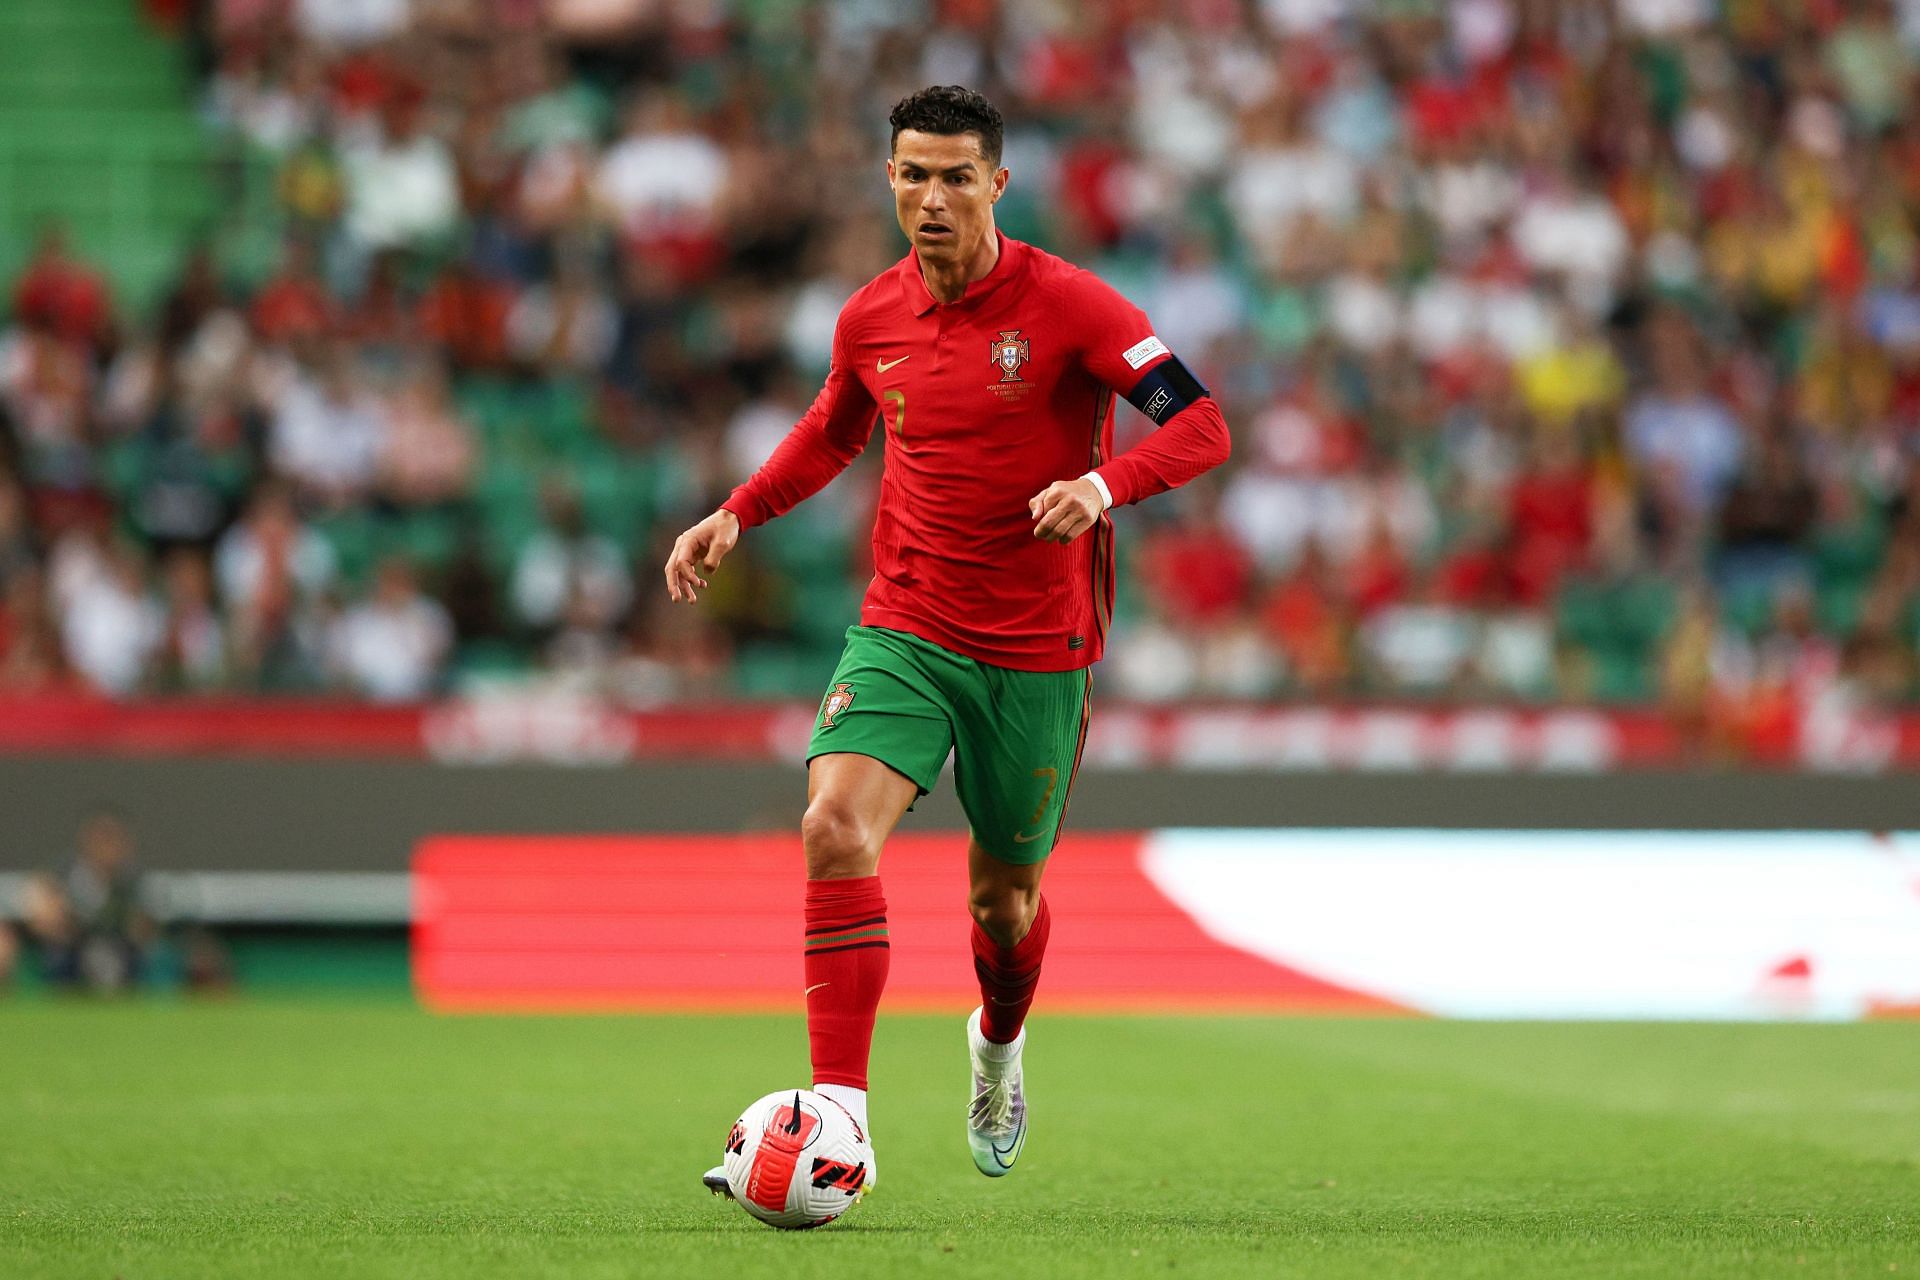 Cristiano Ronaldo could take his Portuguese side to the knockout stages